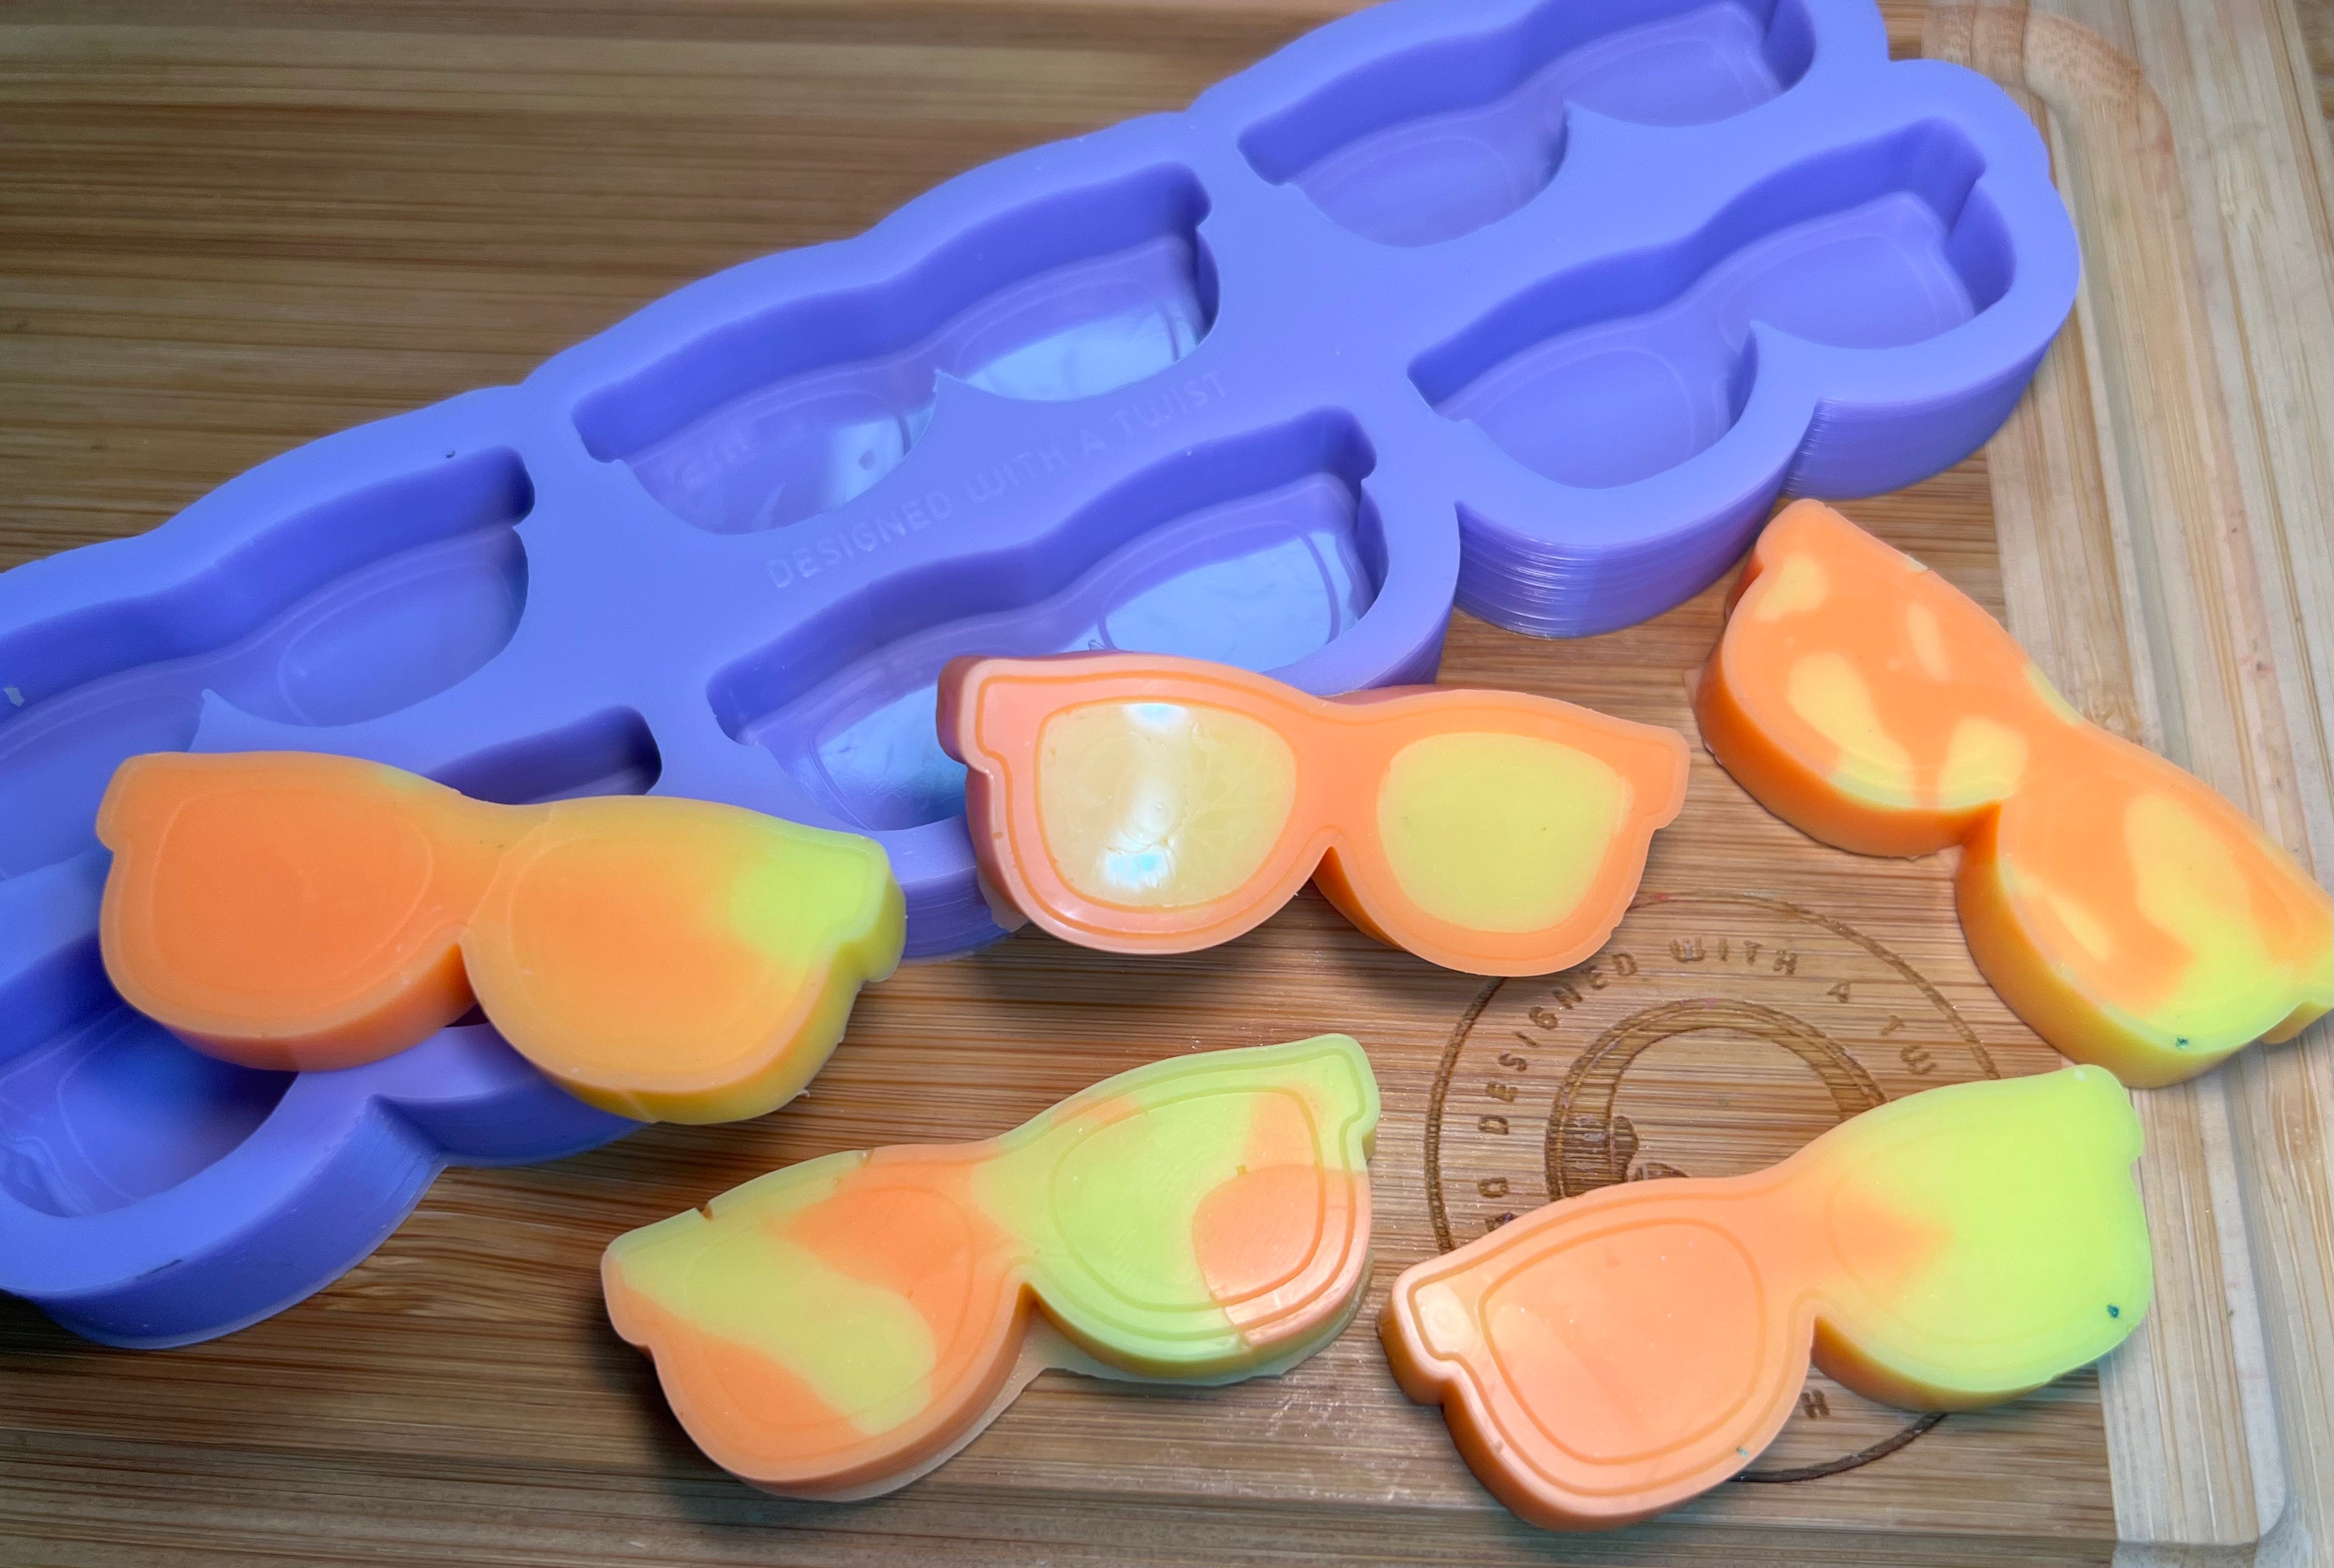 Sunglasses Silicone Mold - Designed with a Twist - Top quality silicone molds made in the UK.